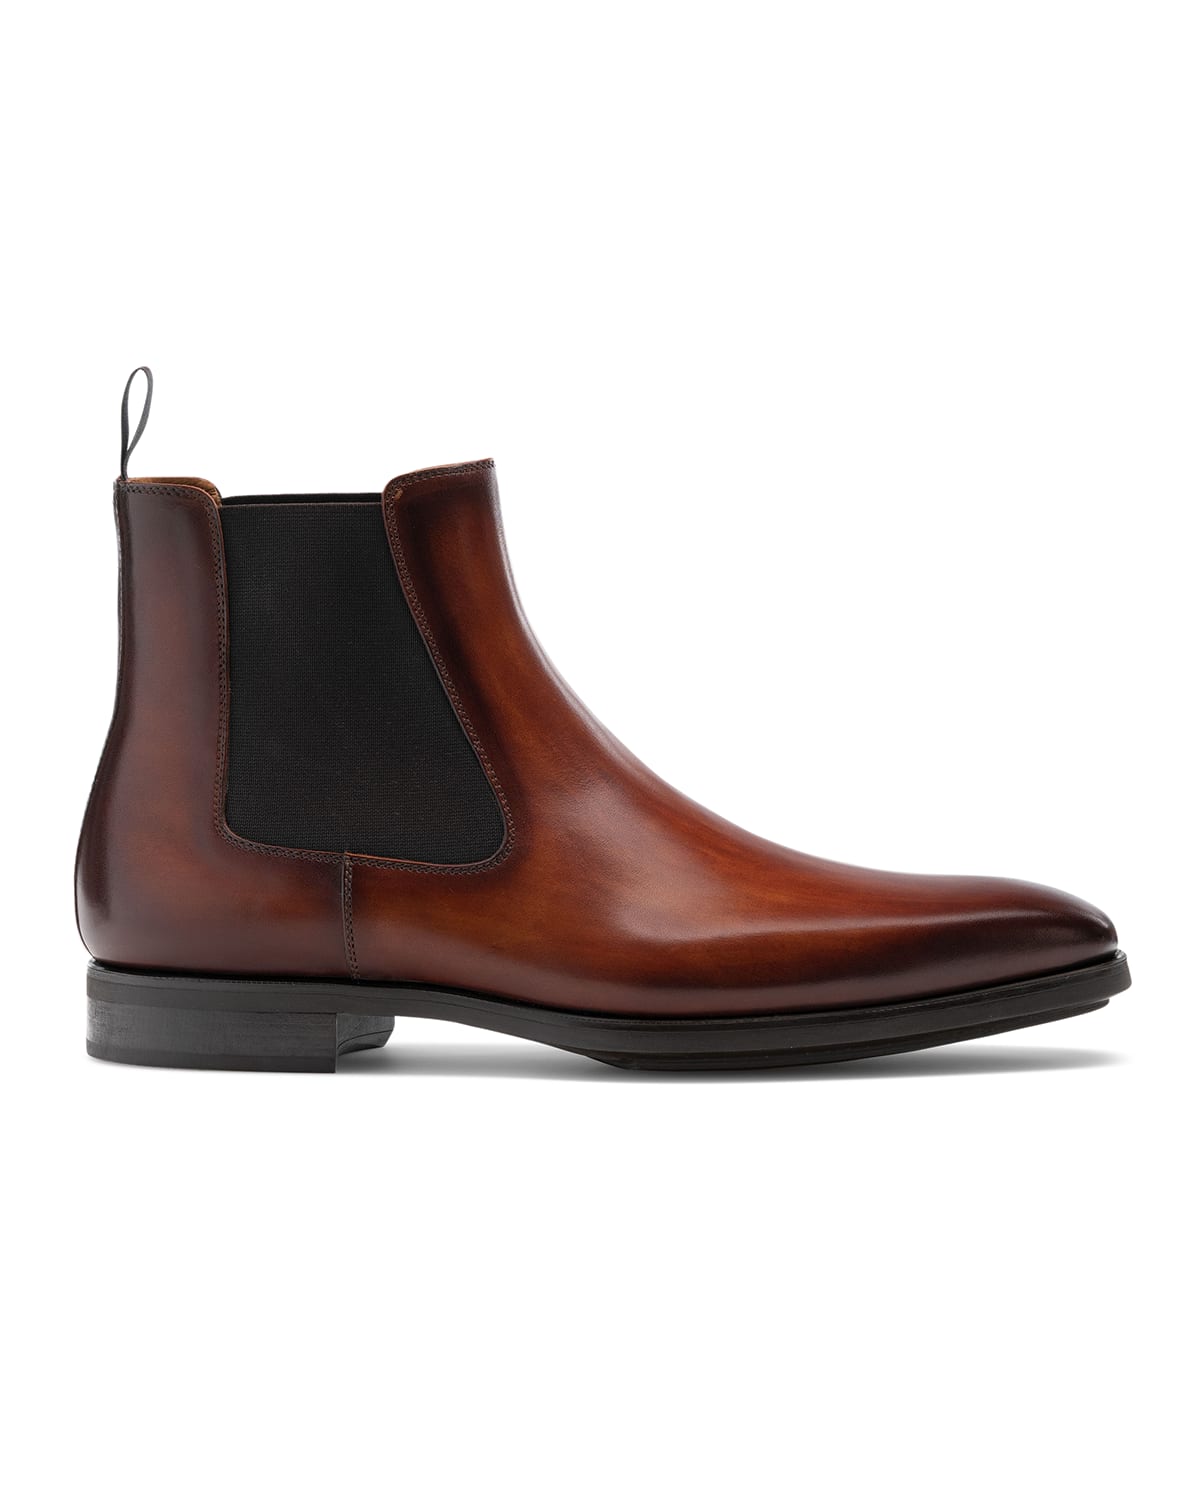 MAGNANNI MEN'S RILEY SMOOTH LEATHER CHELSEA BOOTS